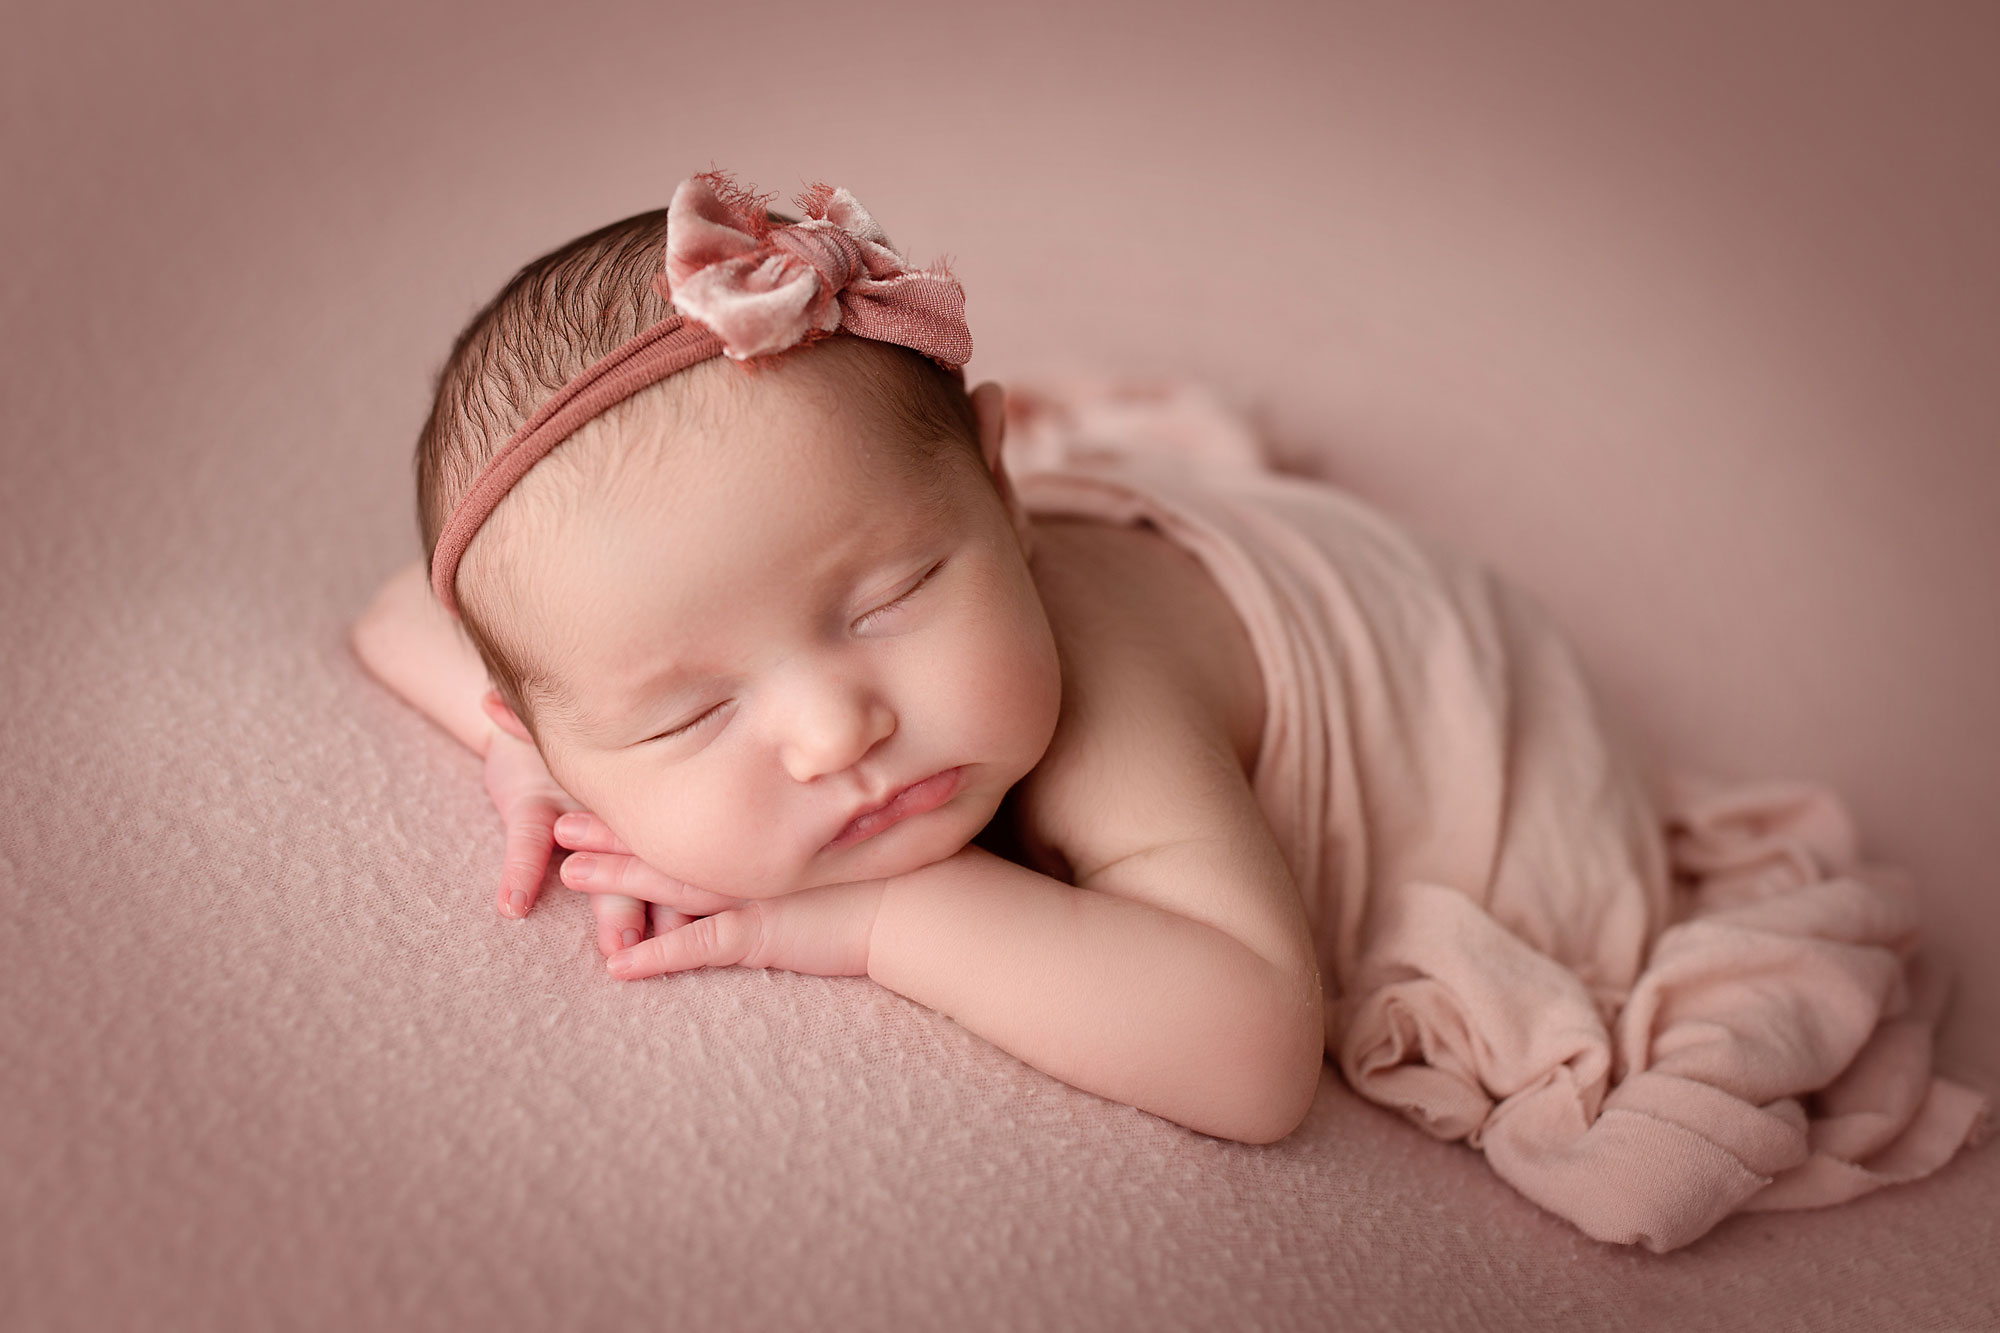 jersey city baby photos, baby girl in pale pink wrap and bow